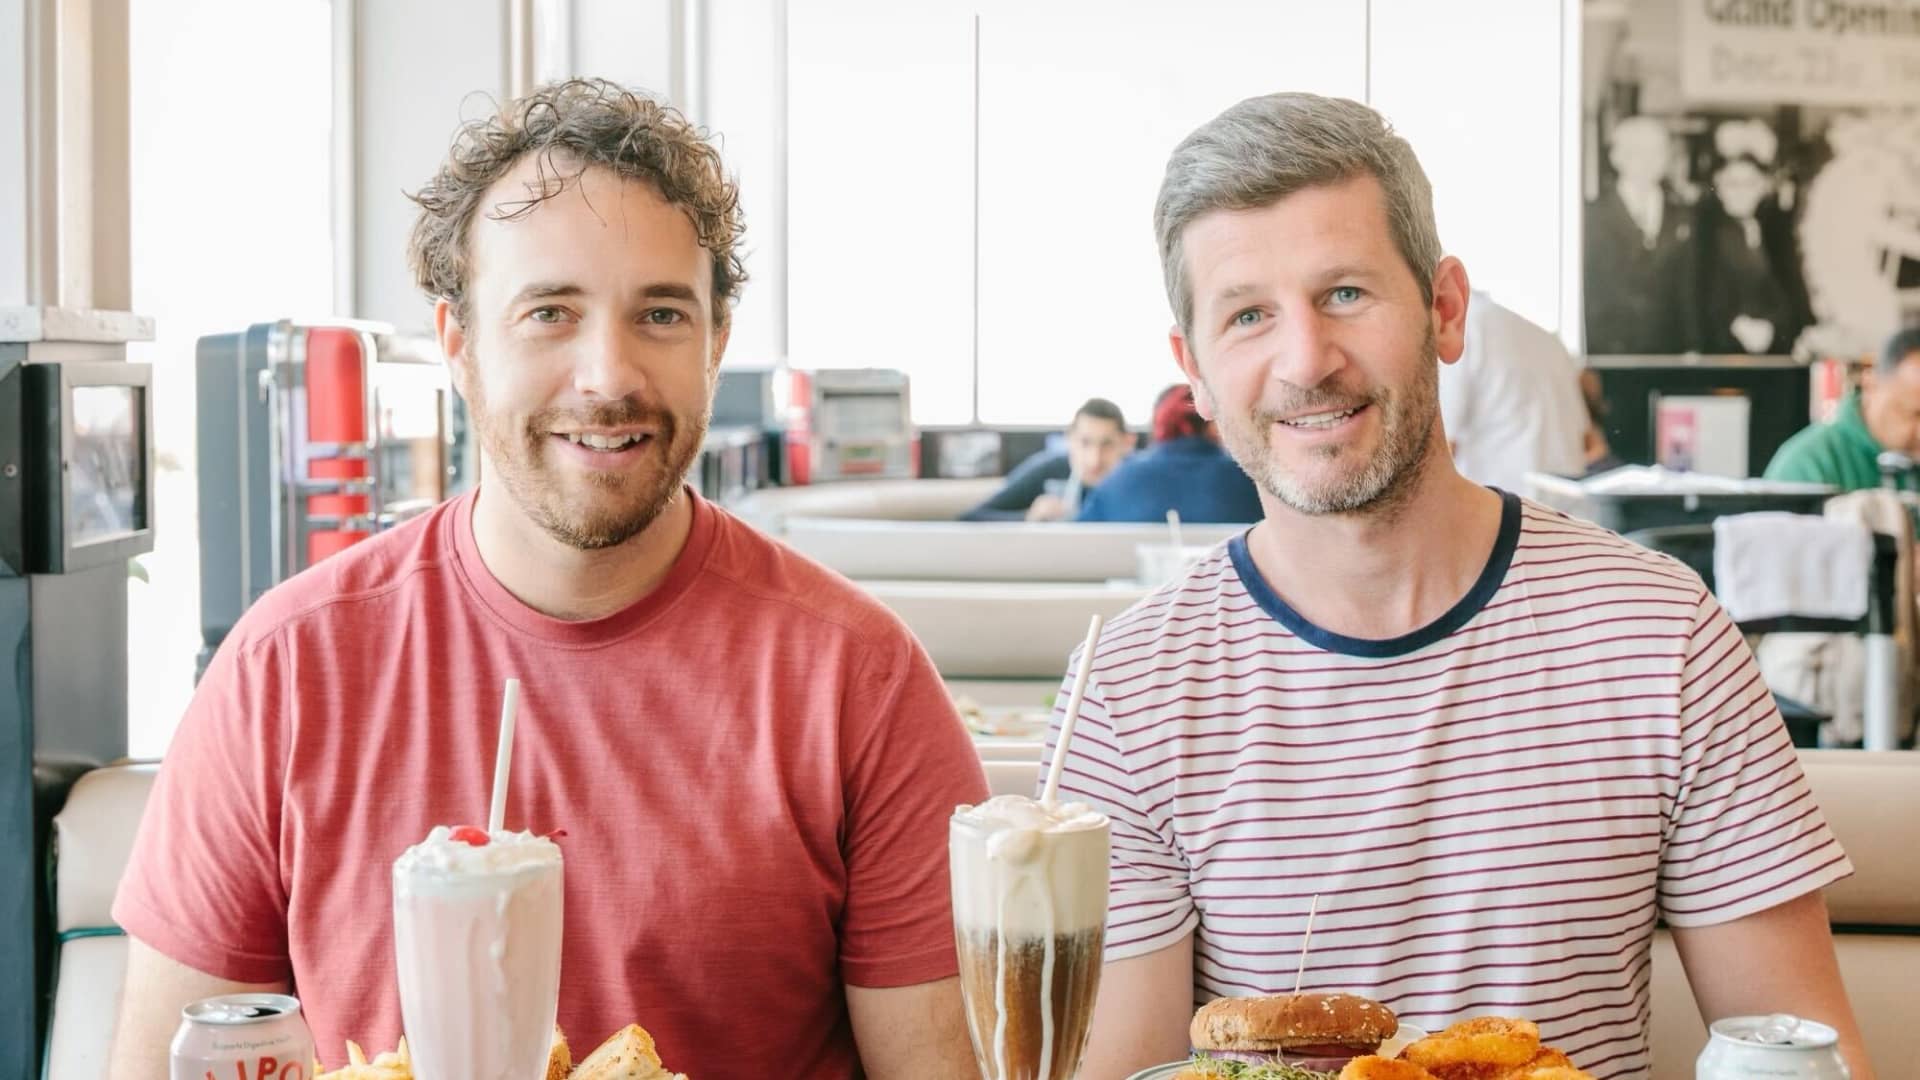 How Olipop’s founders turned a 0,000 investment into a ‘healthier’ soda brand bringing in million a month